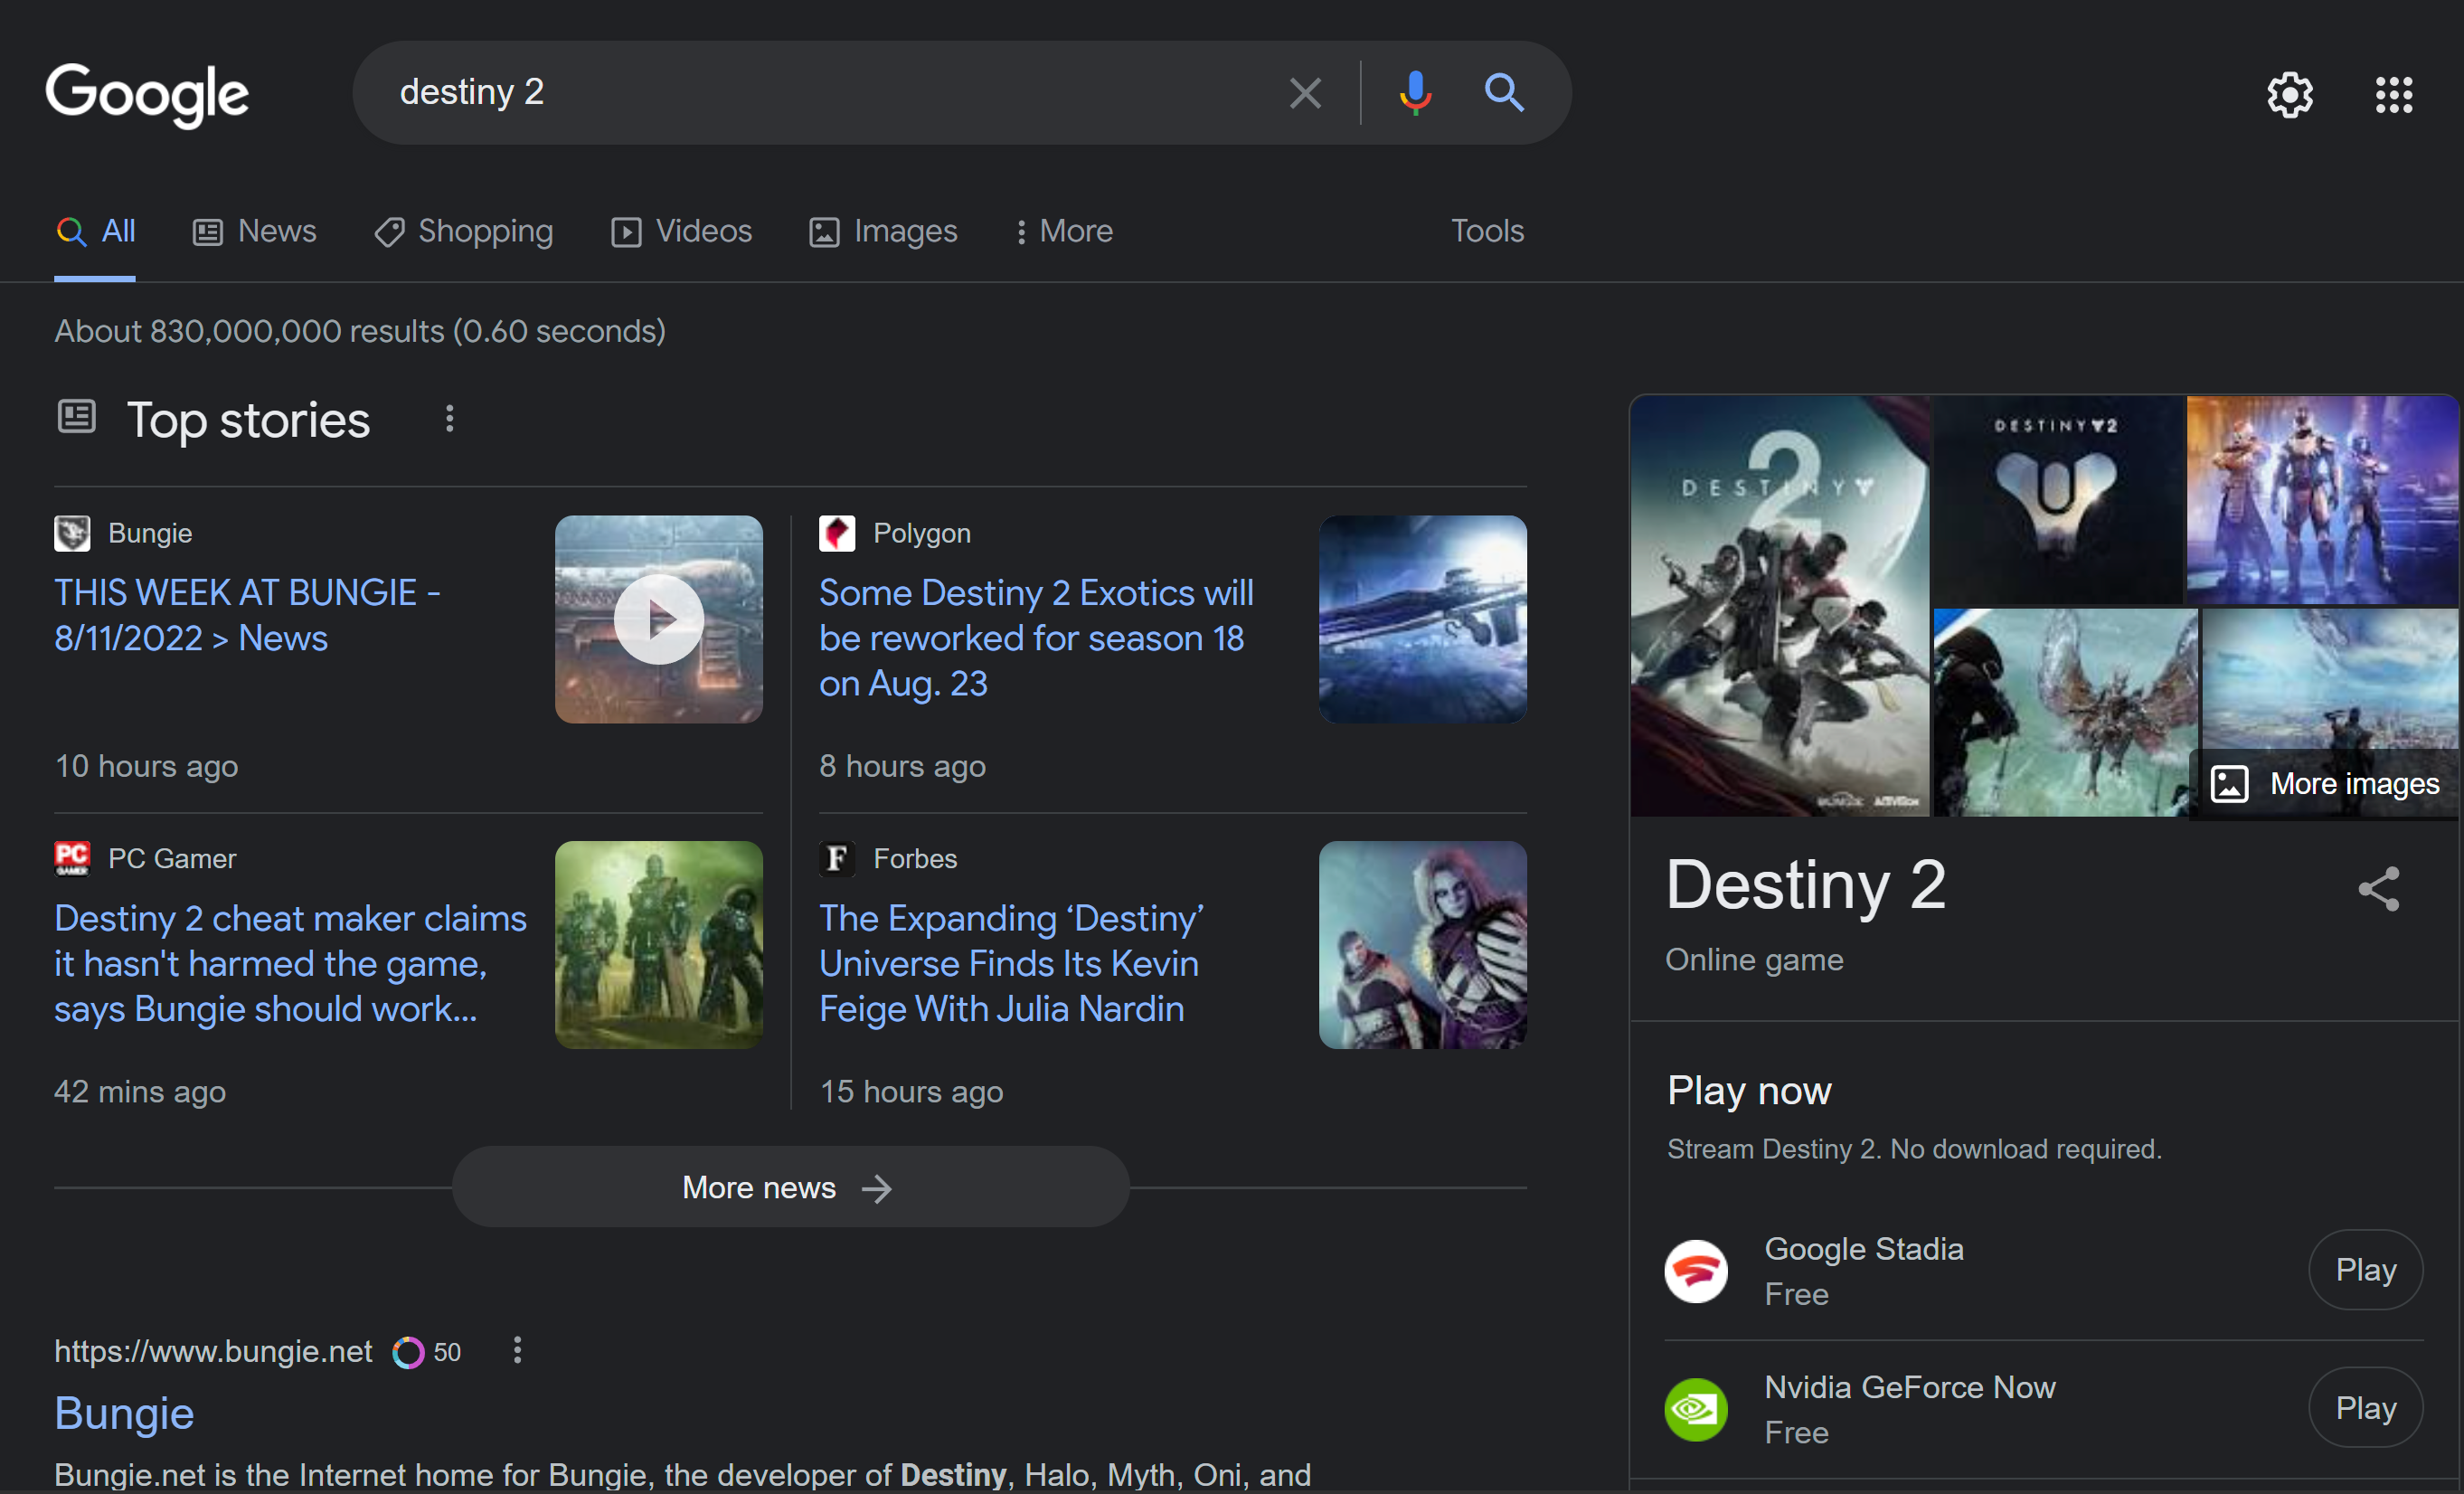 Google is reportedly bringing instantly playable online games to